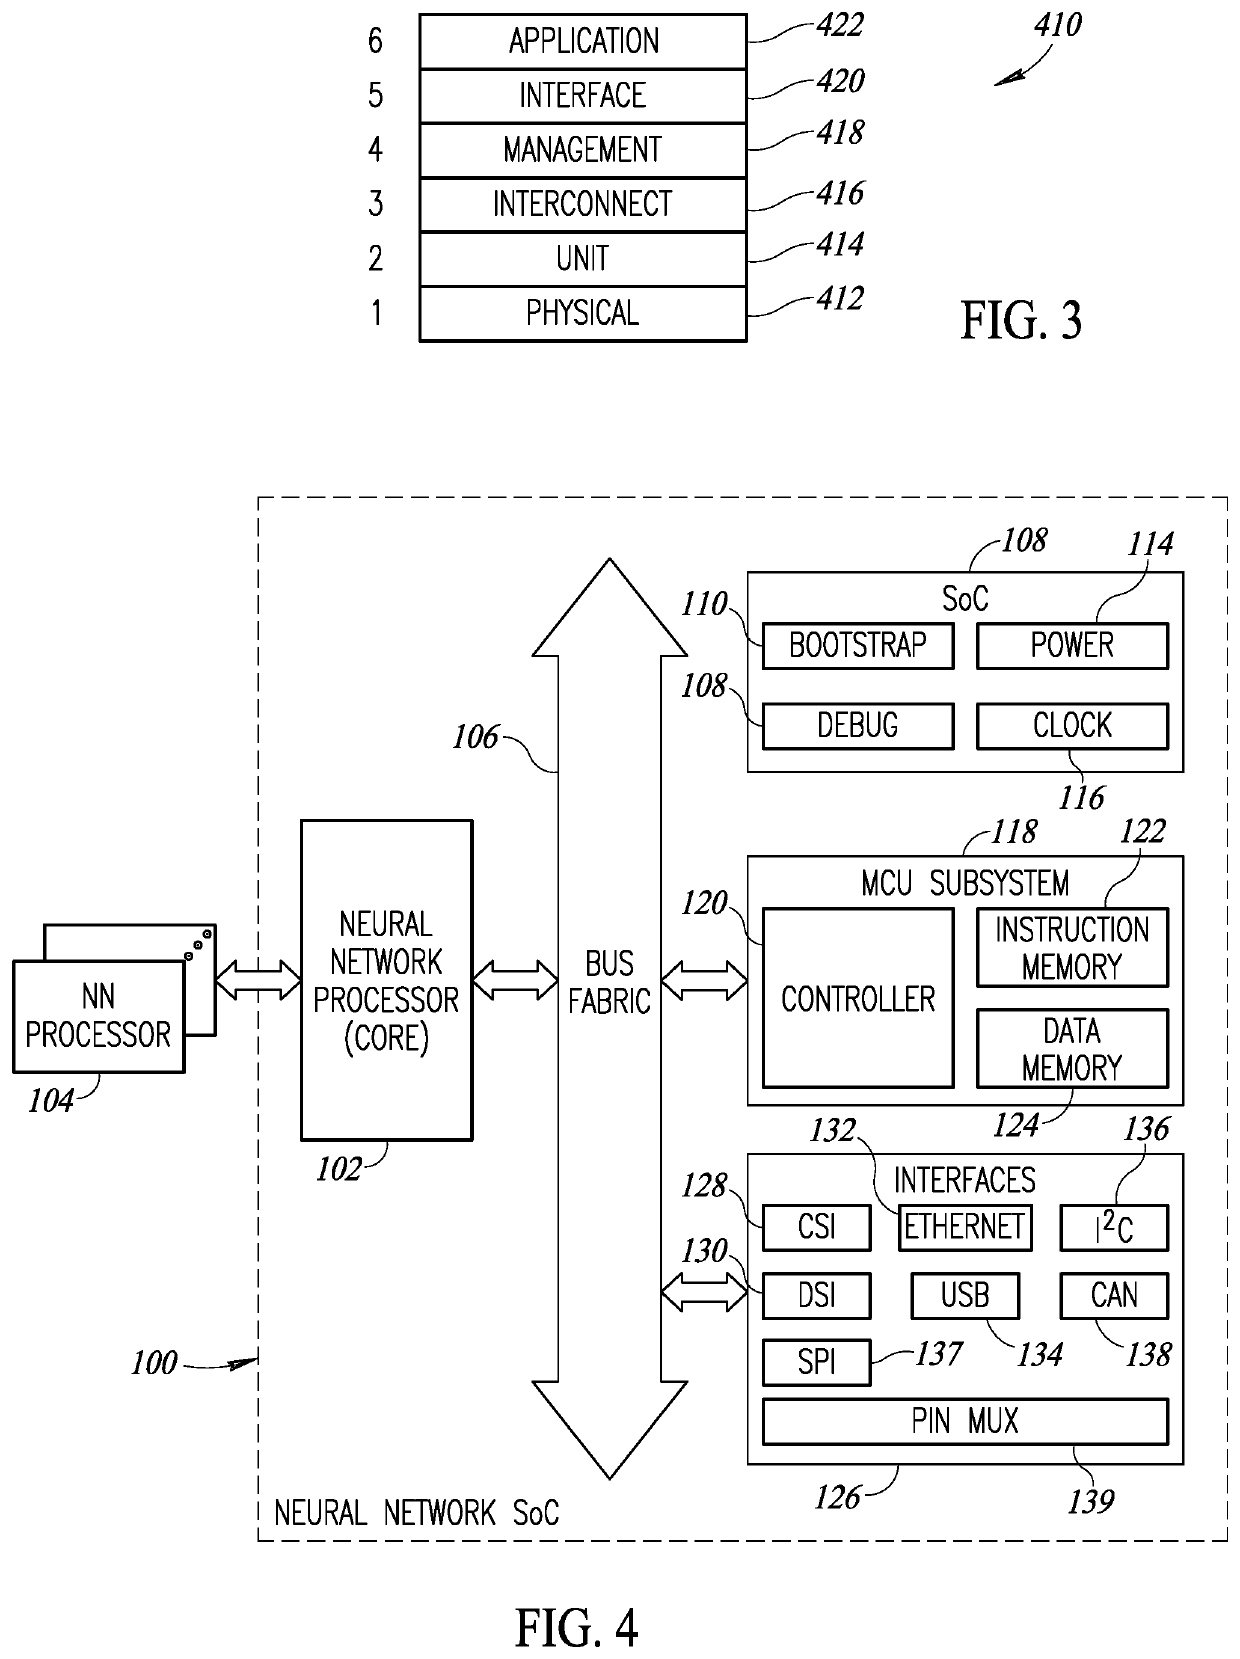 Software Defined Redundant Allocation Safety Mechanism In An Artificial Neural Network Processor